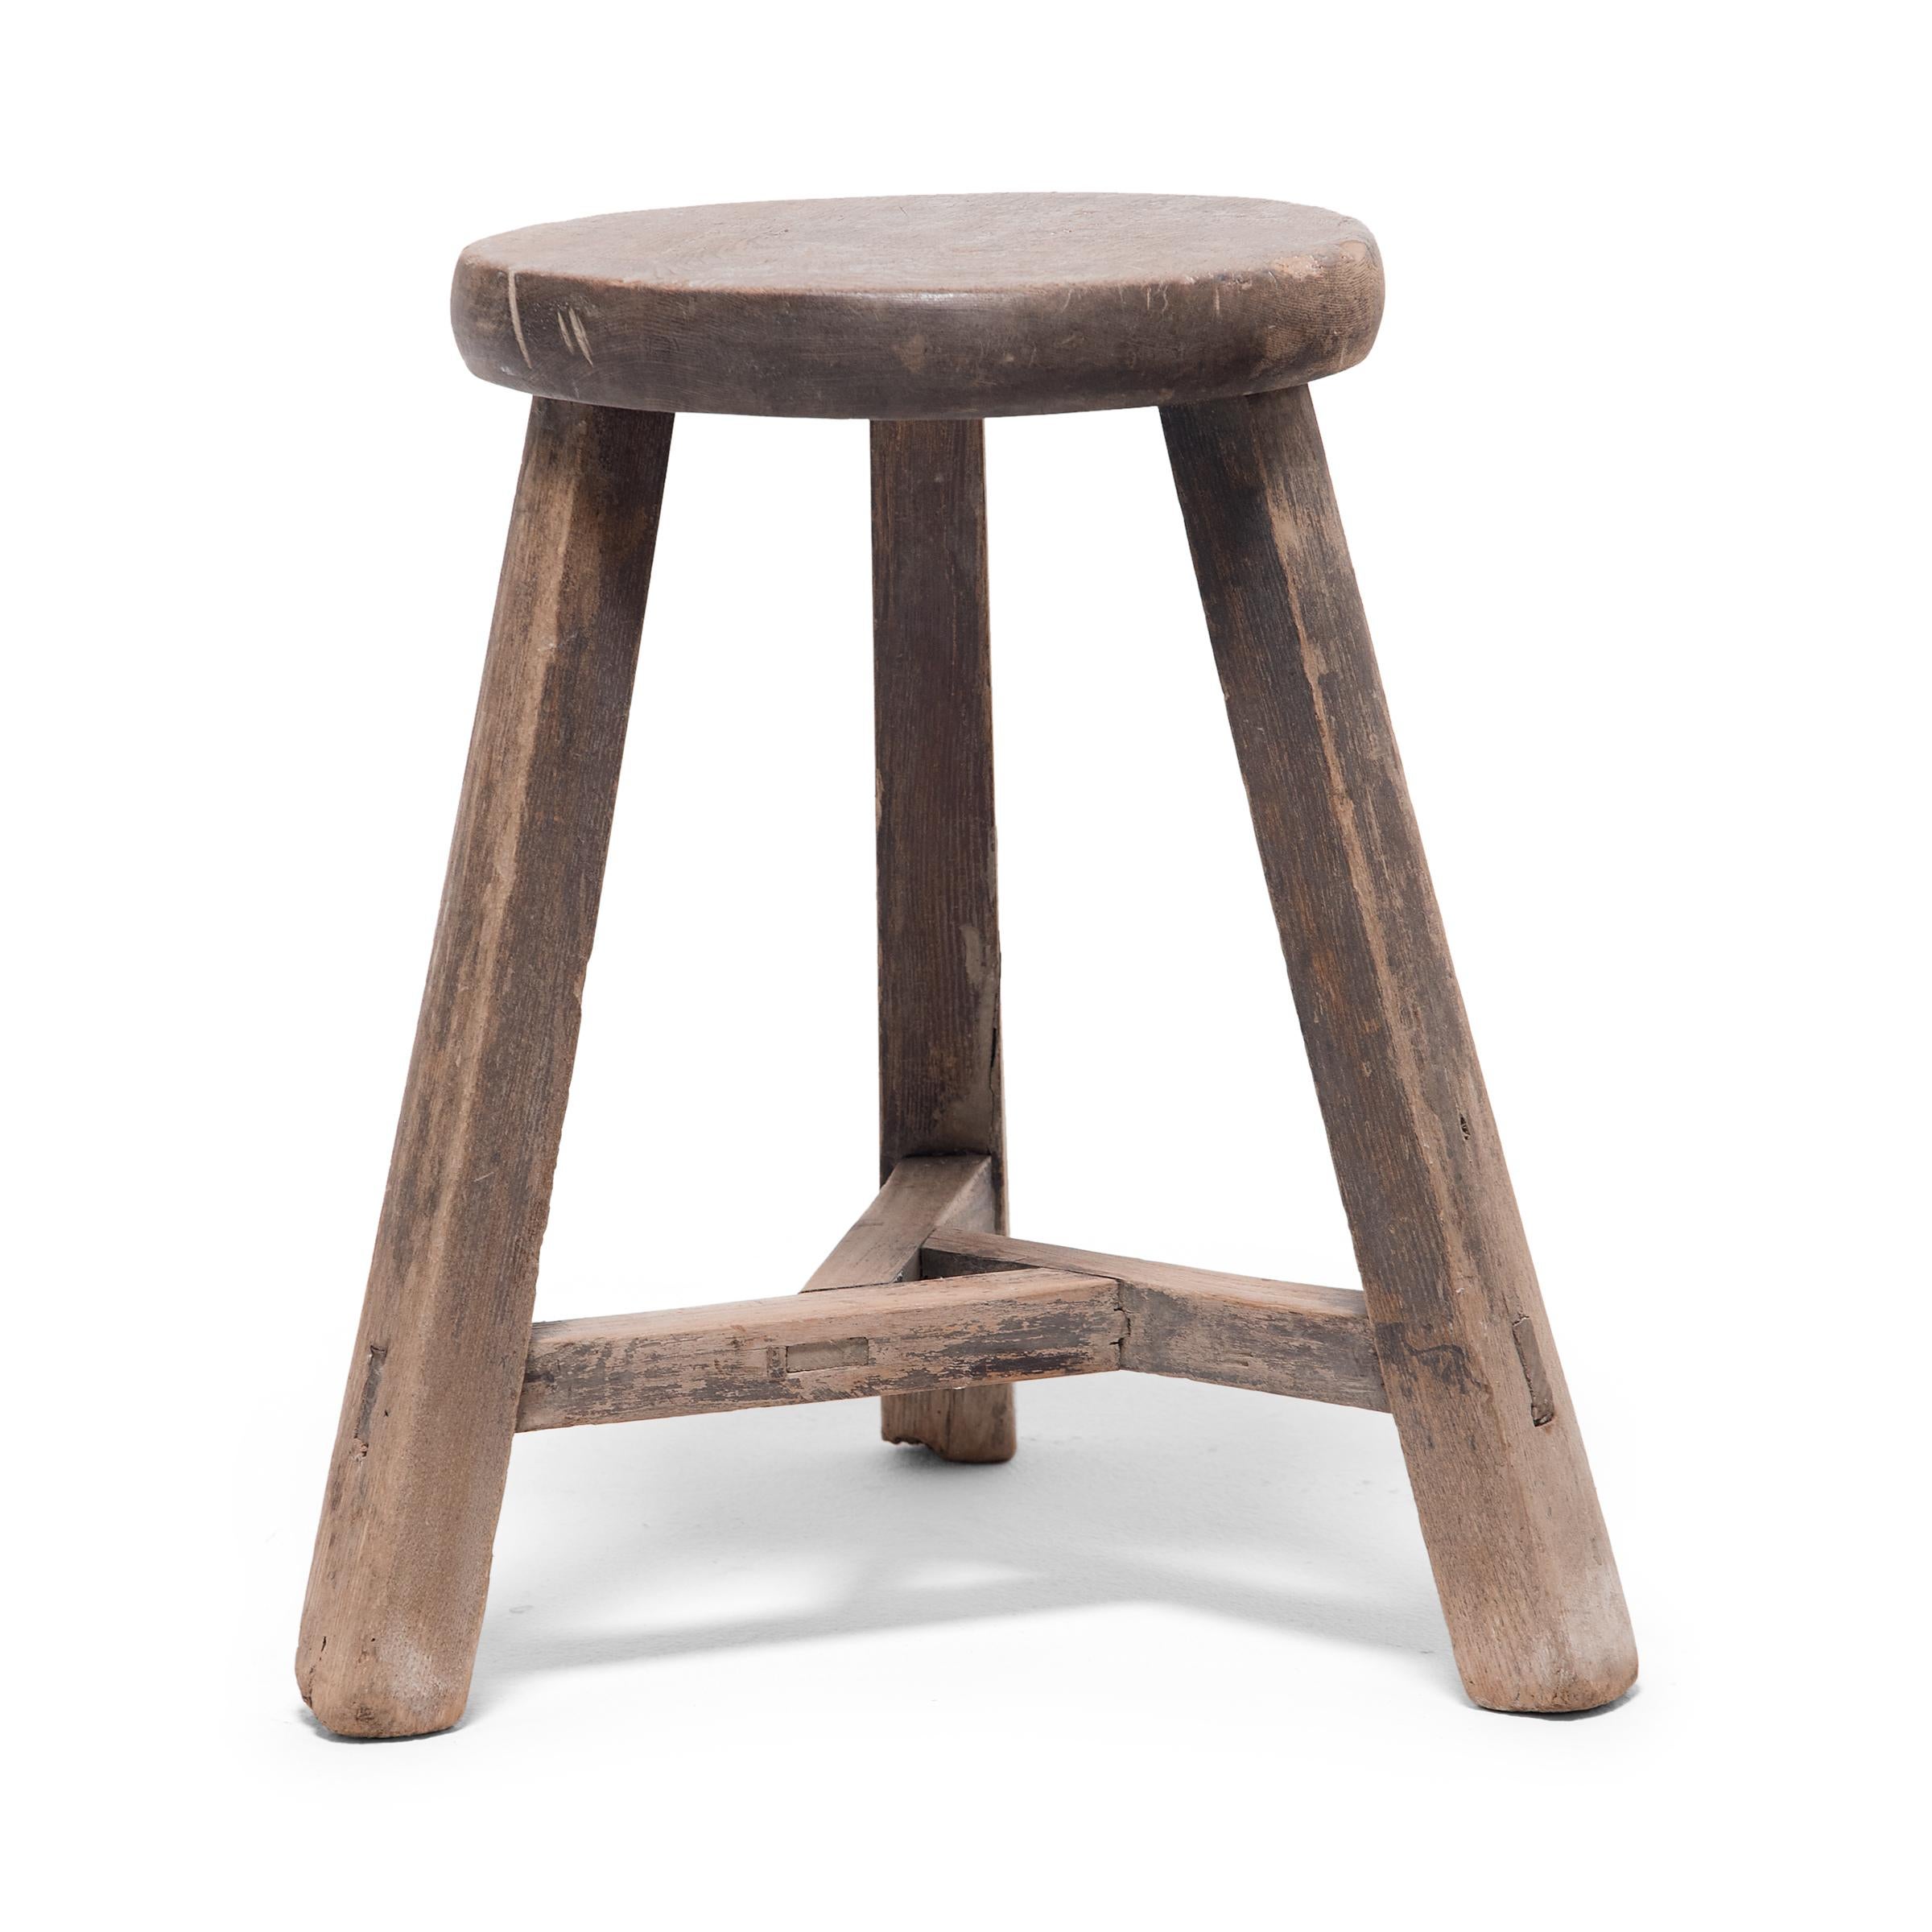 Deceptively simple, this early 20th century stool from Hebei province shows off the ingenious joinery methods traditionally used by Chinese carpenters. The stool's three splayed legs are supported by stretcher bars that interlock at the center to